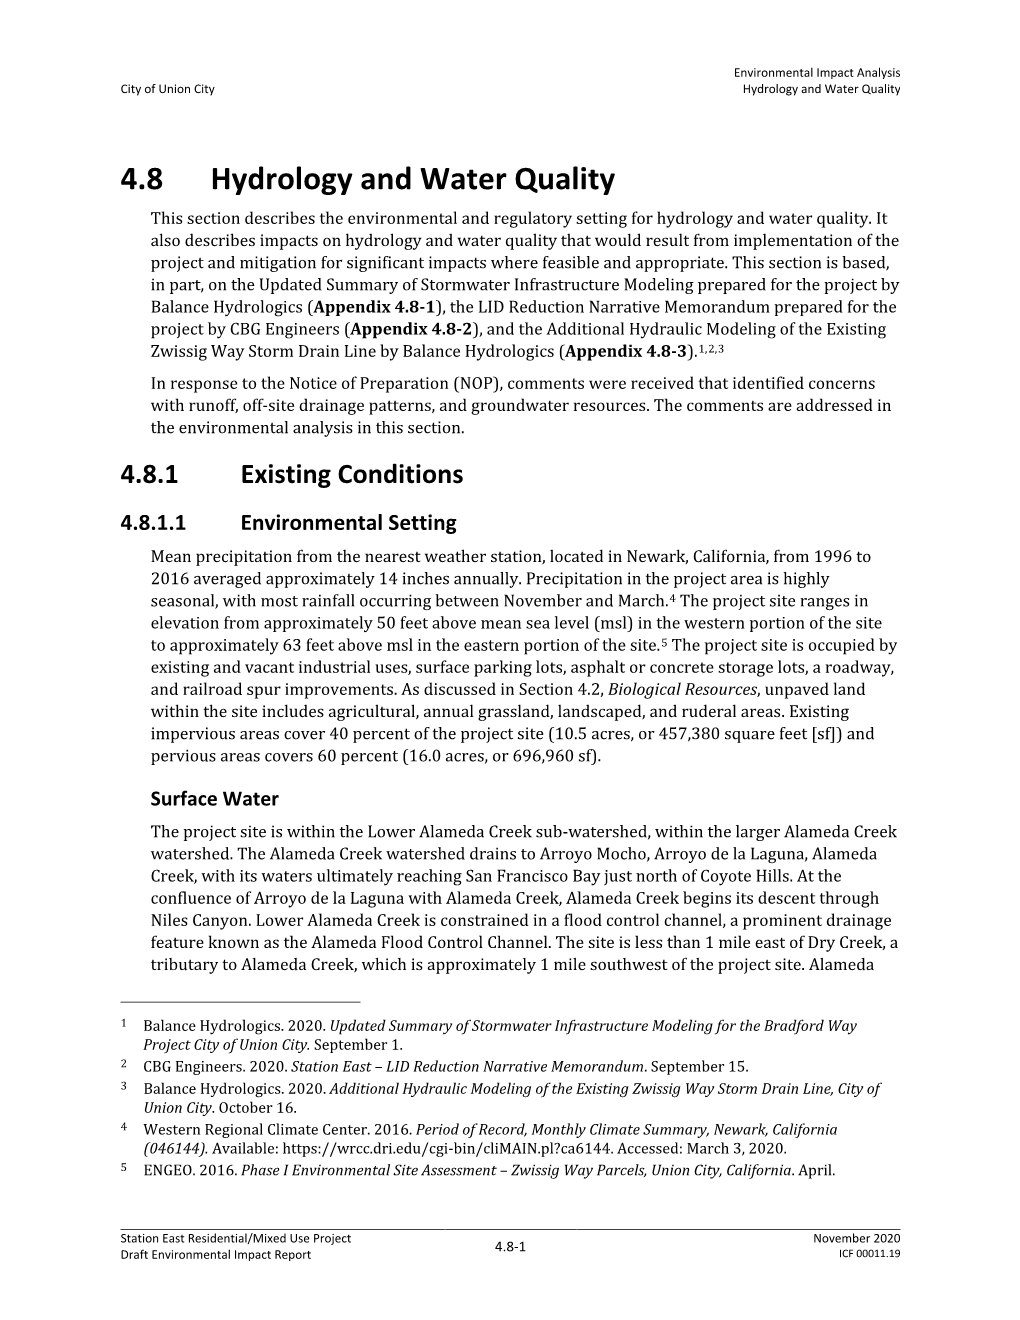 4.8 Hydrology and Water Quality This Section Describes the Environmental and Regulatory Setting for Hydrology and Water Quality